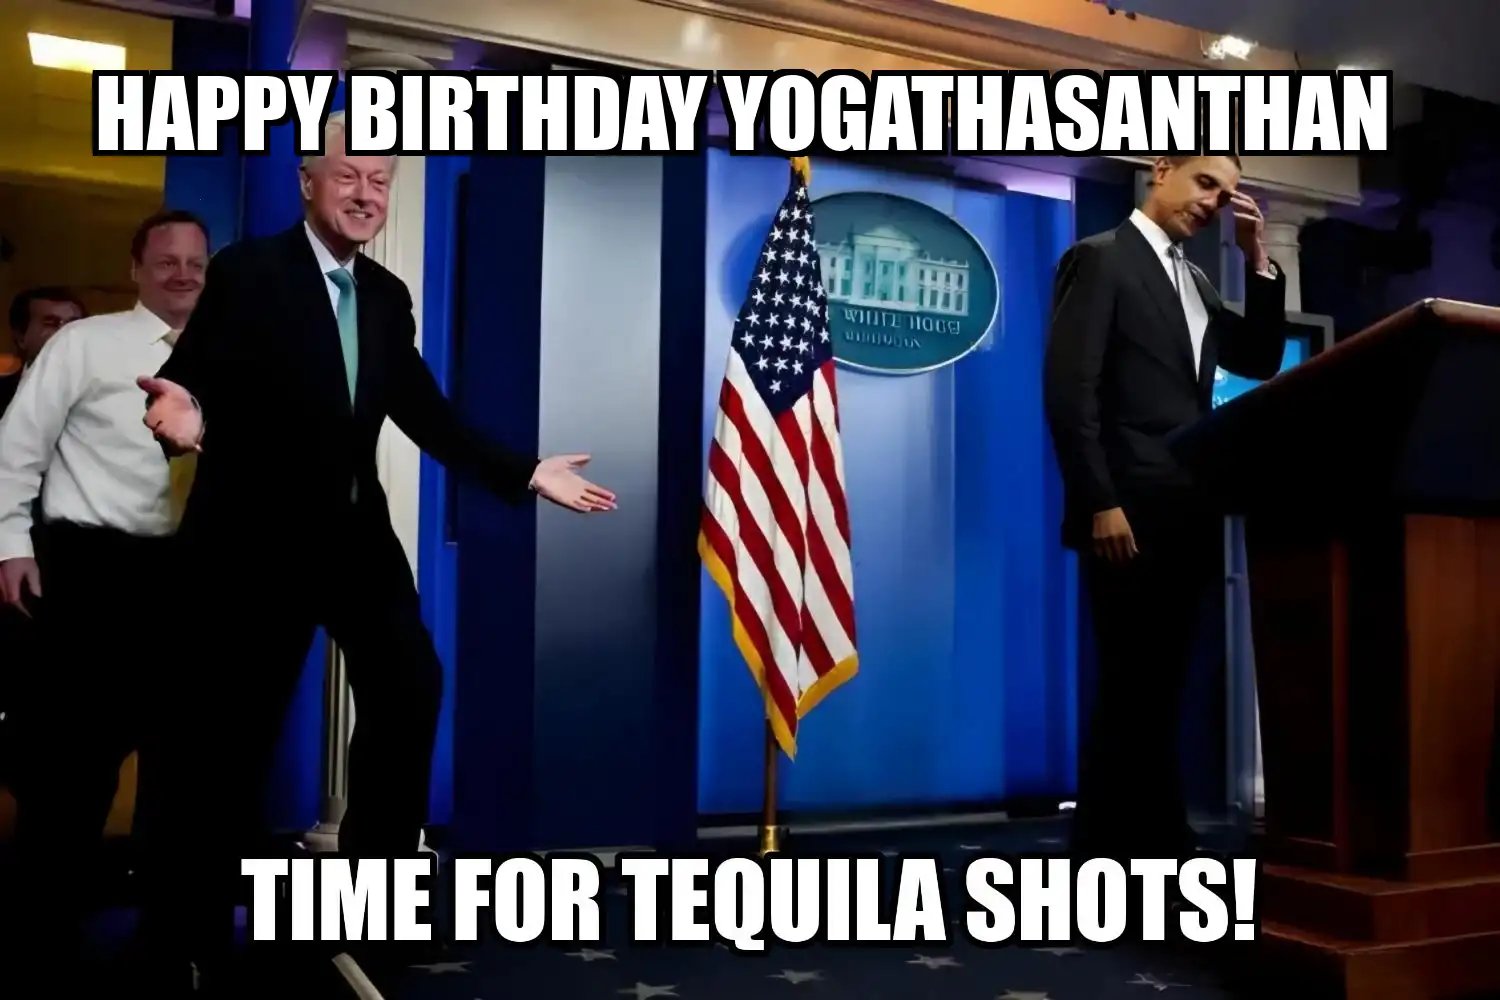 Happy Birthday Yogathasanthan Time For Tequila Shots Memes